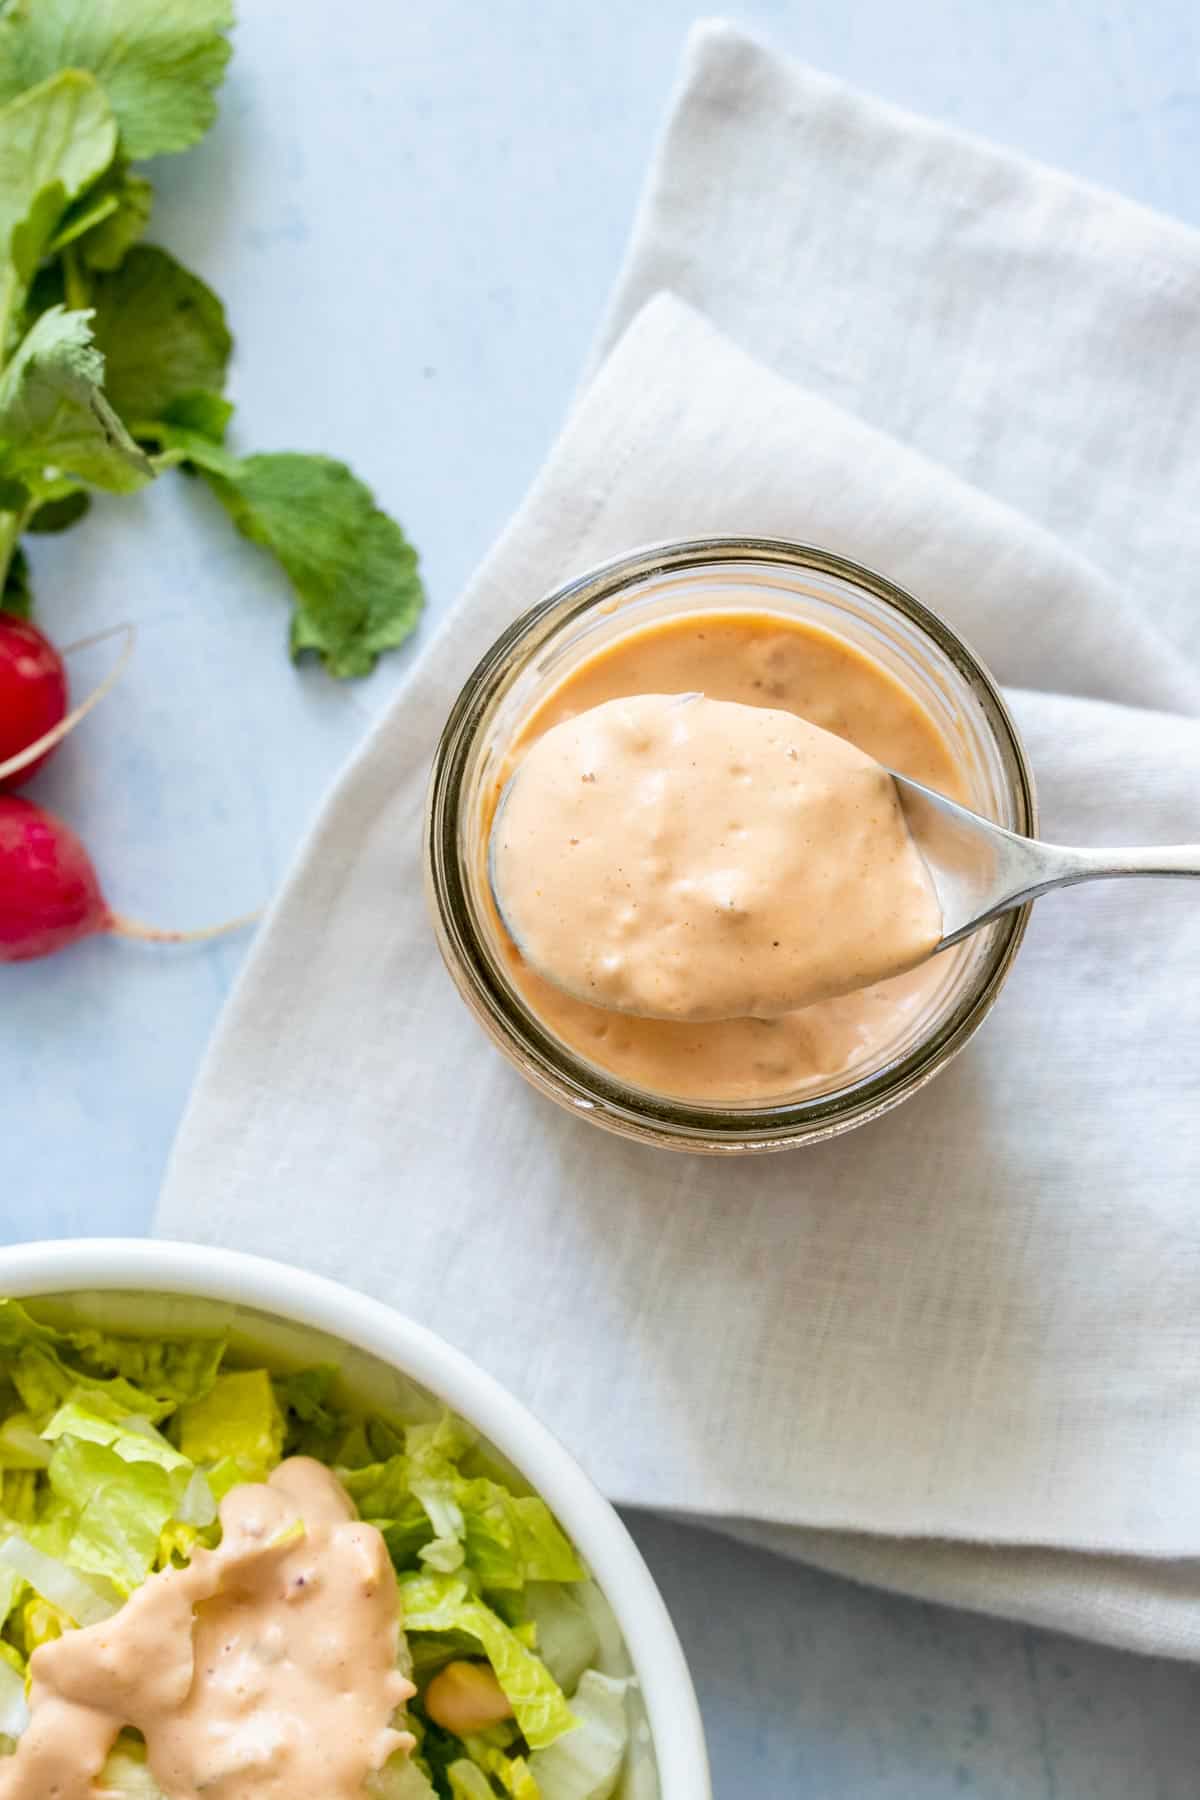 A spoon coming out of a jar with thousand island dressing on it next to a bowl of salad with dressing